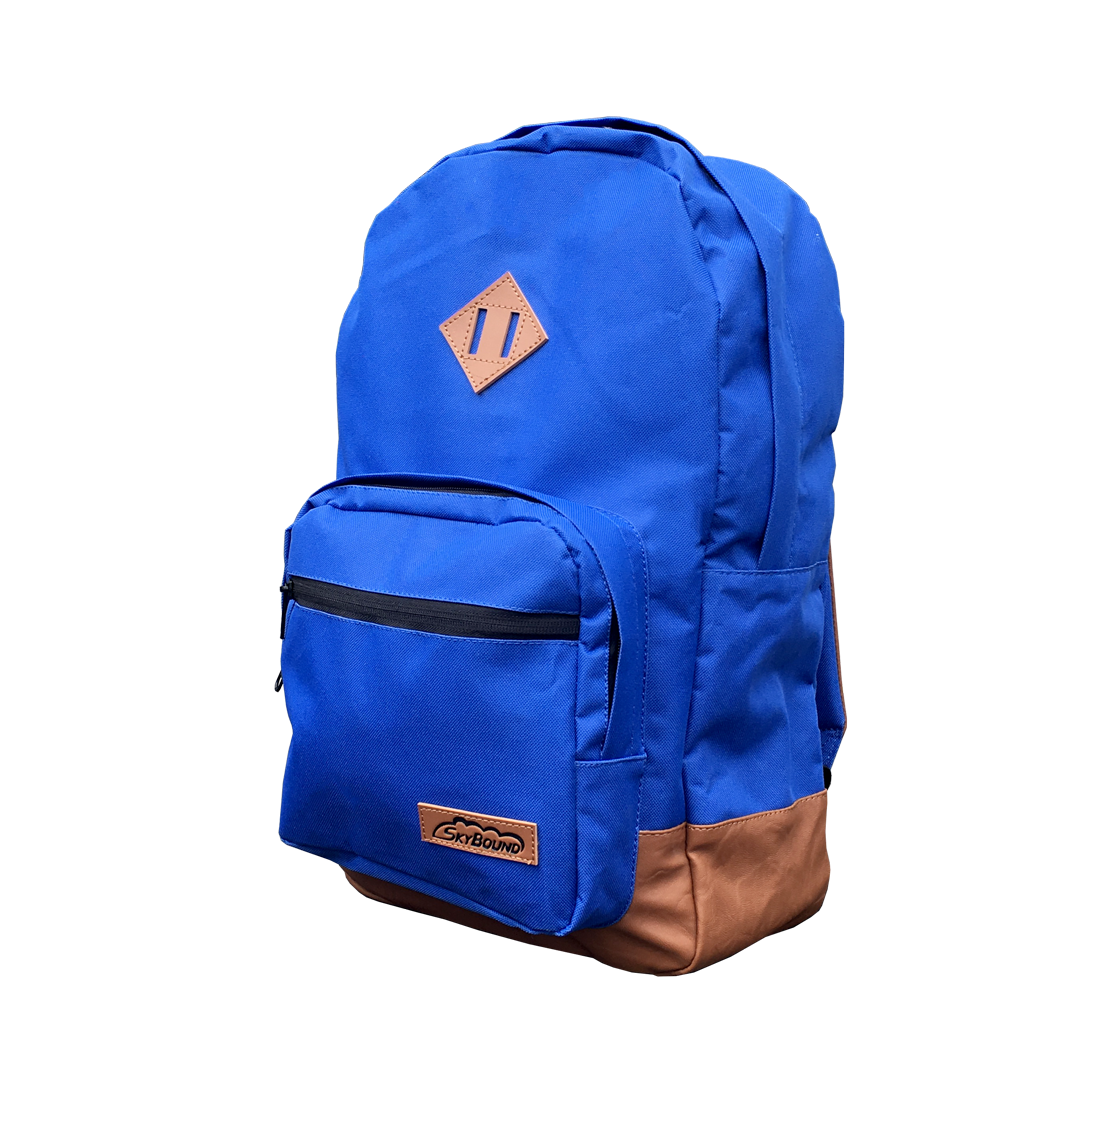 Backpack PNG HD and HQ Image - Backpack Png